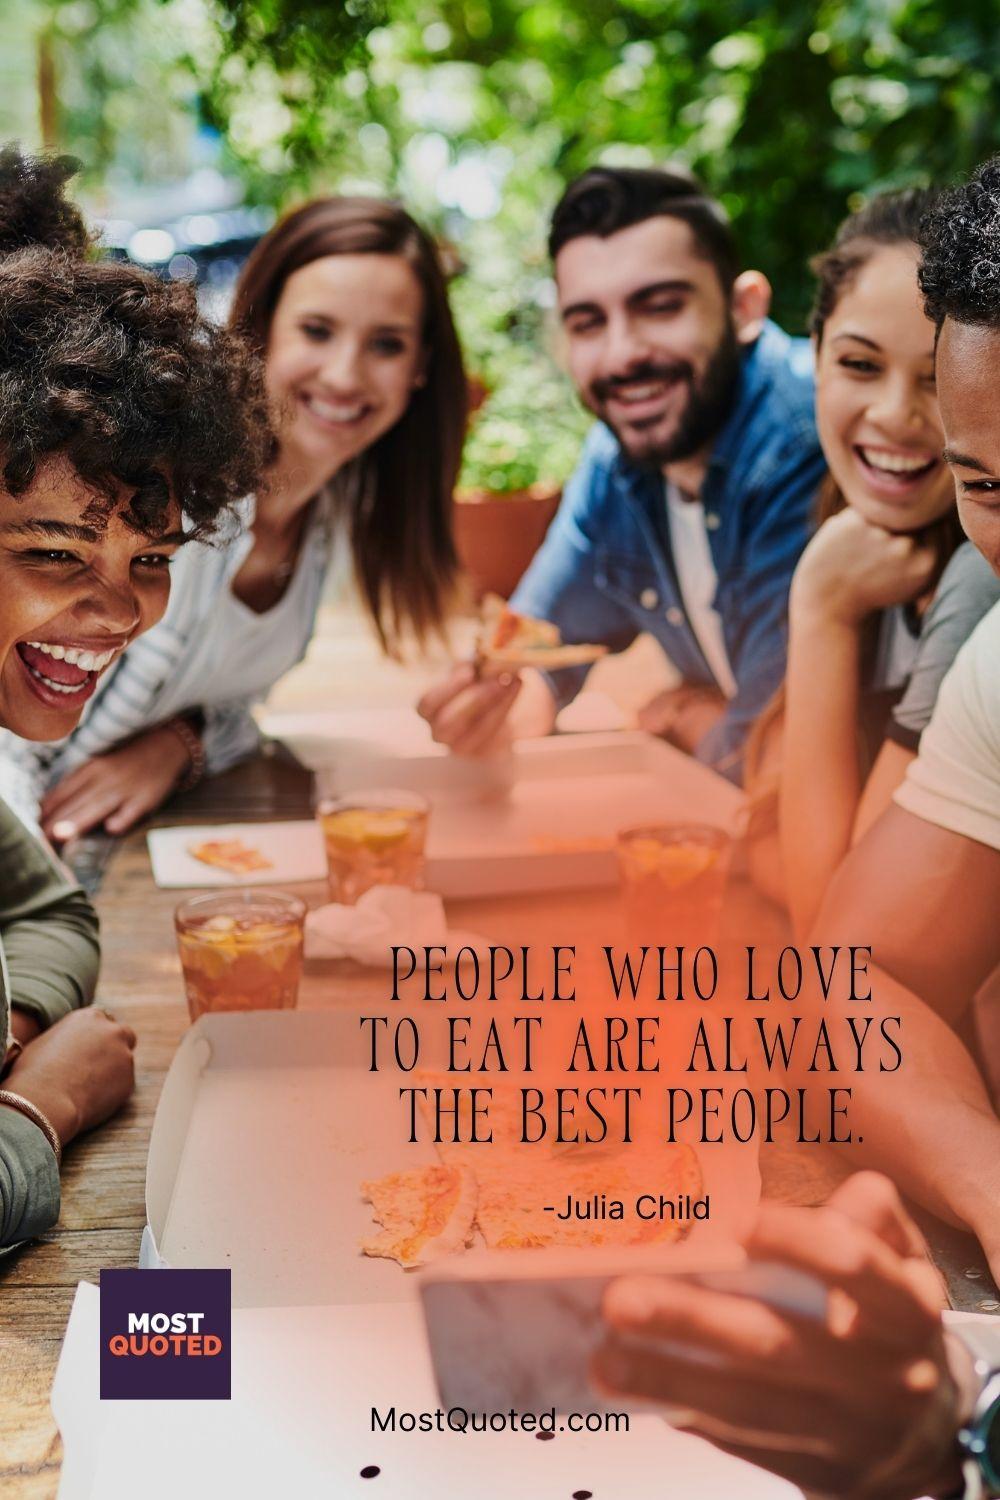 People who love to eat are always the best people. - Julia Child